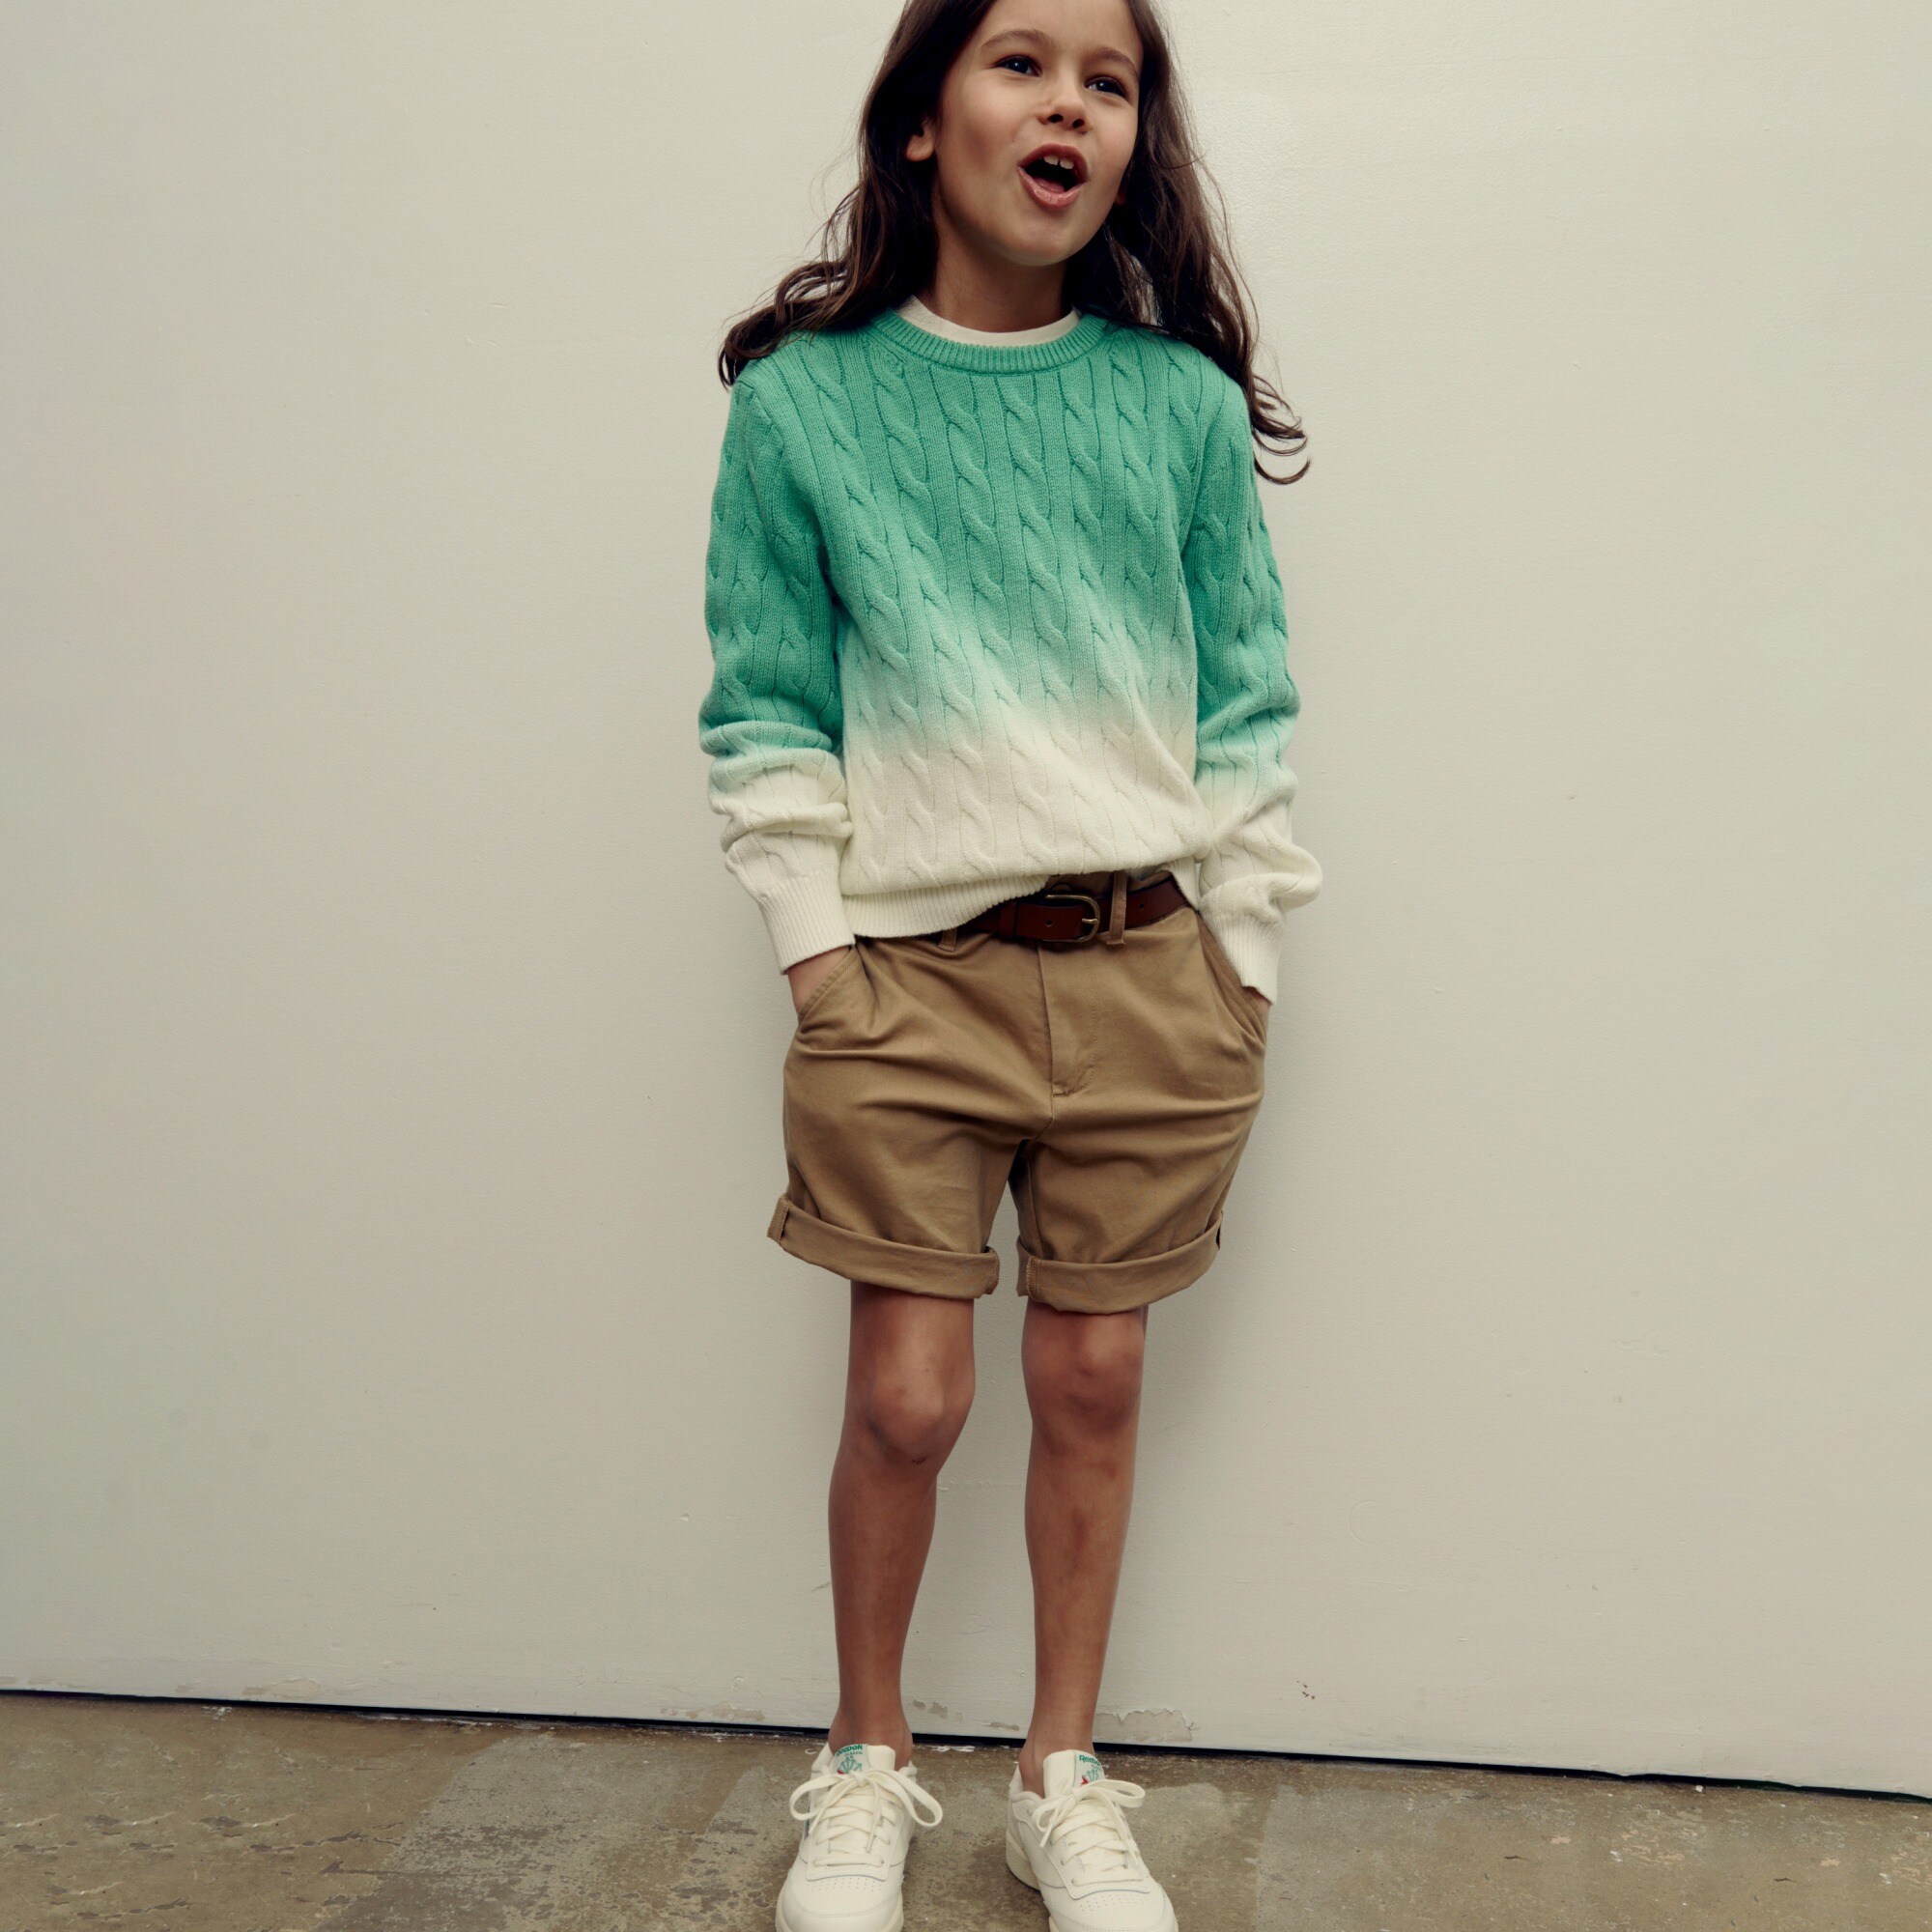 boys Kids' dip-dyed cable-knit sweater